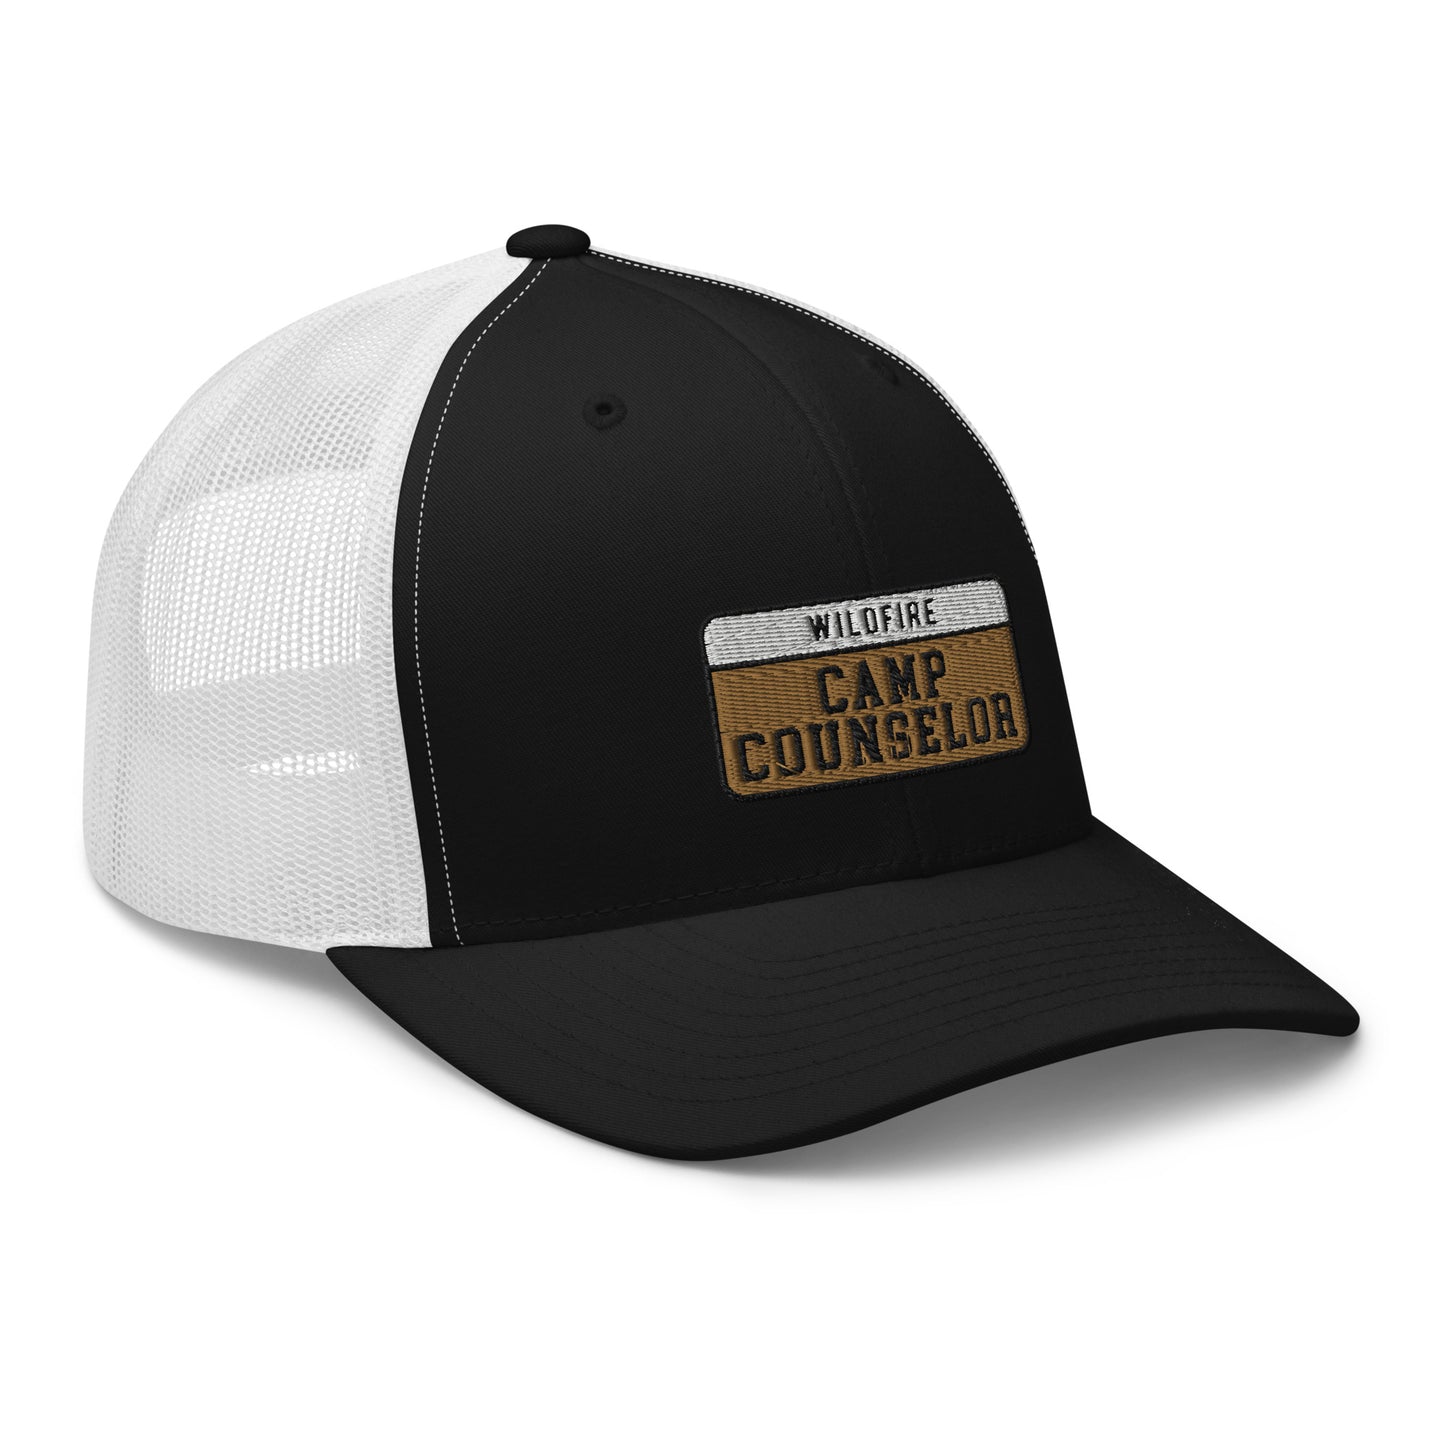 Wildfire Cigars embroidered Camp Counselor retro trucker in black and white facing the front right